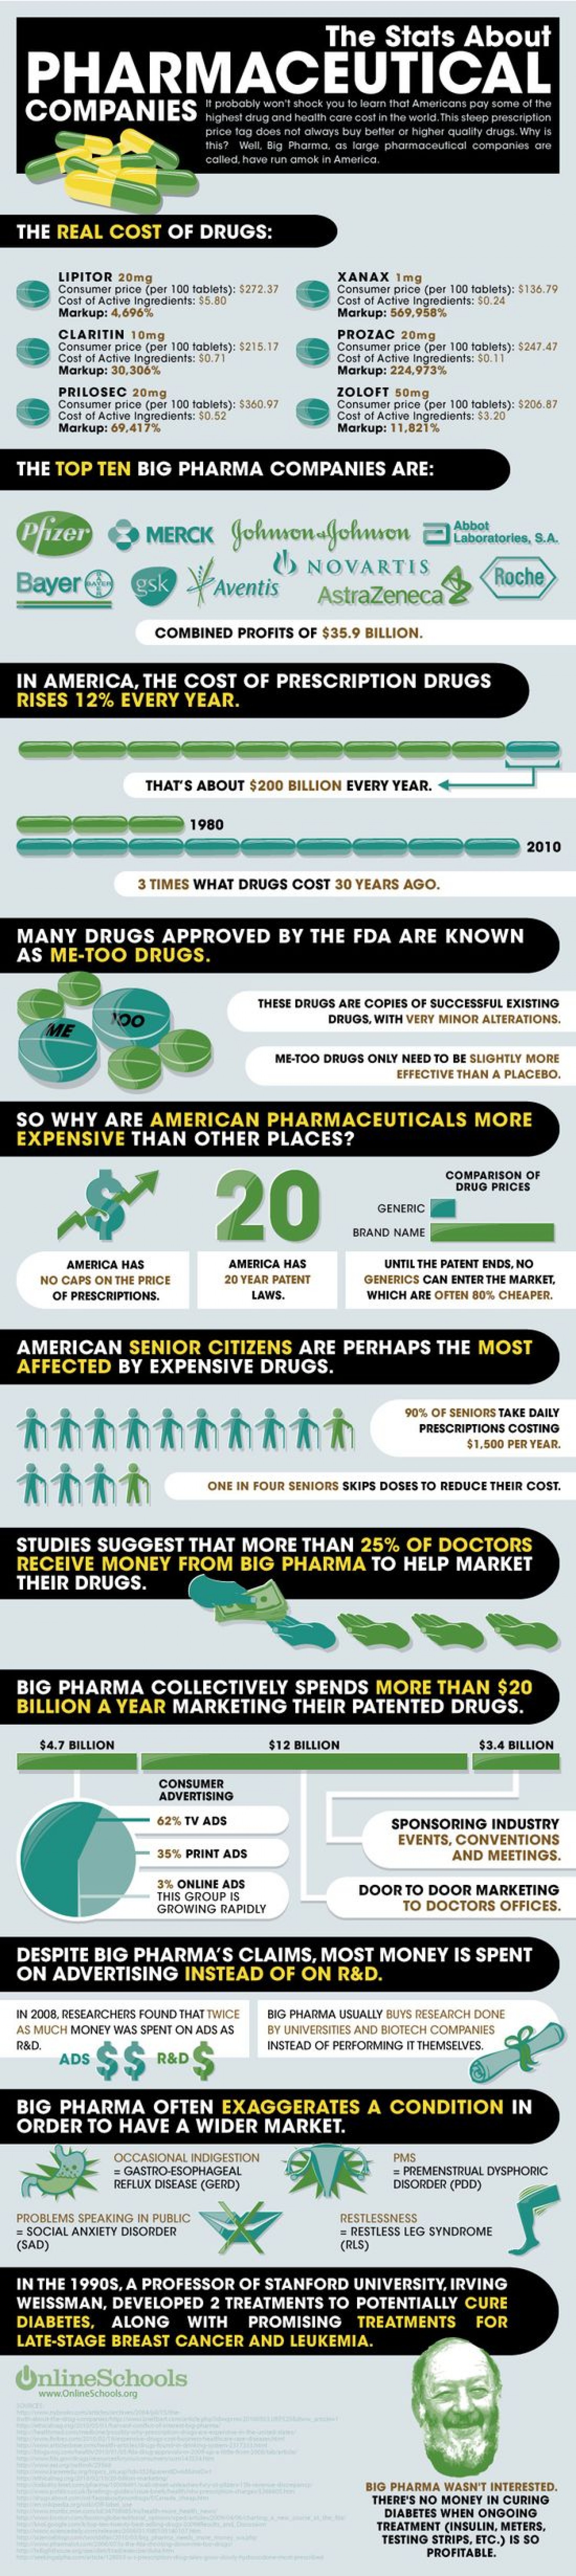 3. The Stats on Pharmaceutical Companies